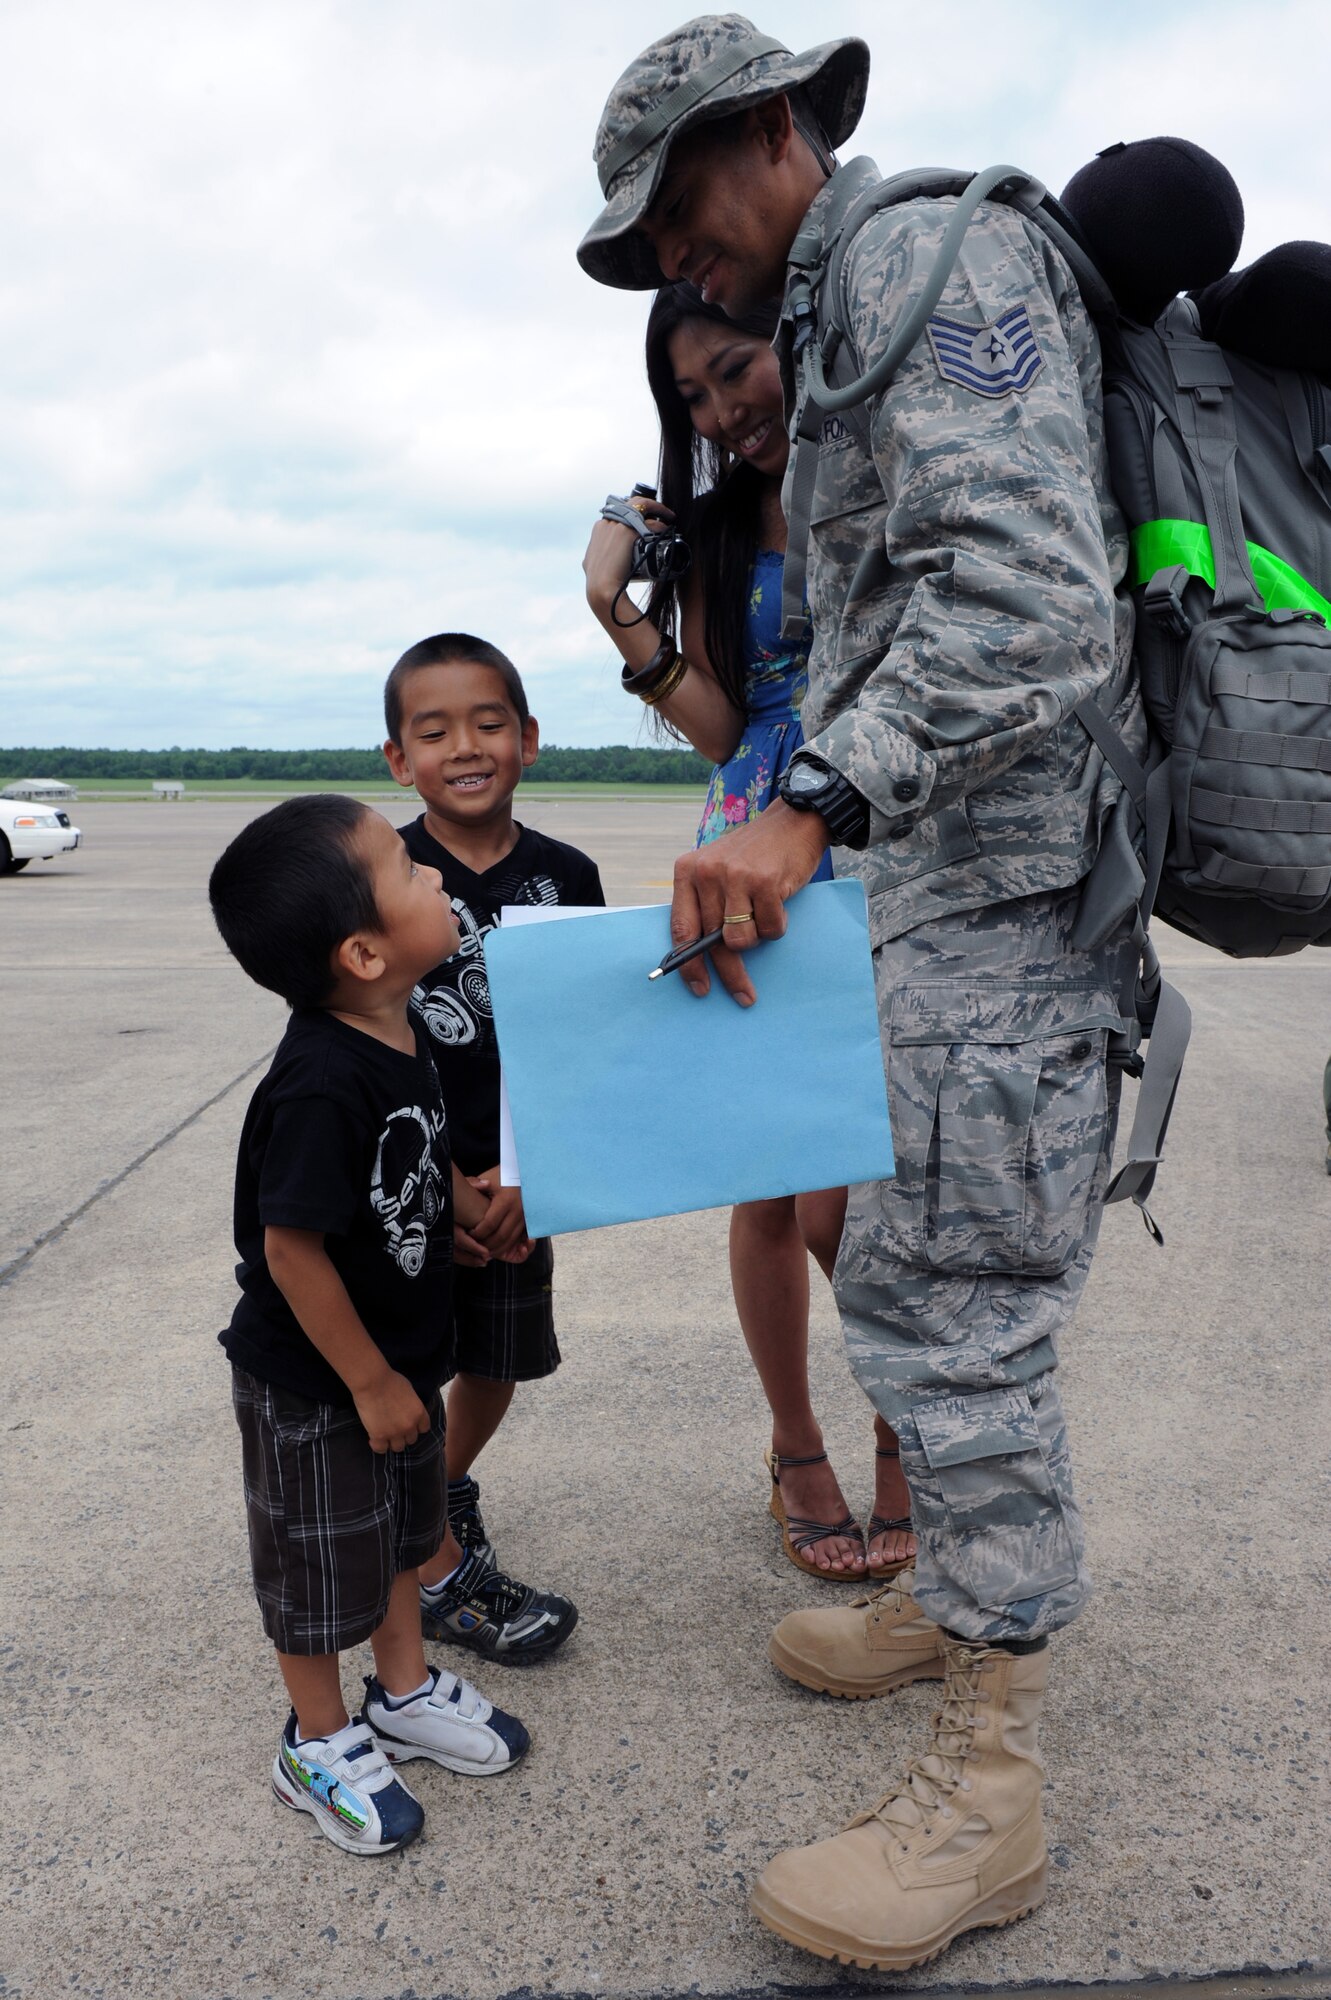 Tech Sgt. Obed Figueroa, a 19th Aircraft Maintenance Squadron crew chief, is greeted by his family on the base flightline May 21, 2011, at Little Rock Air Force Base, Ark. Sergeant Figueroa was one of nearly 200 Airmen that returned home after supporting operations in Southwest Asia. (U.S. Air Force Photo by Airman 1st Class Rusty Frank)